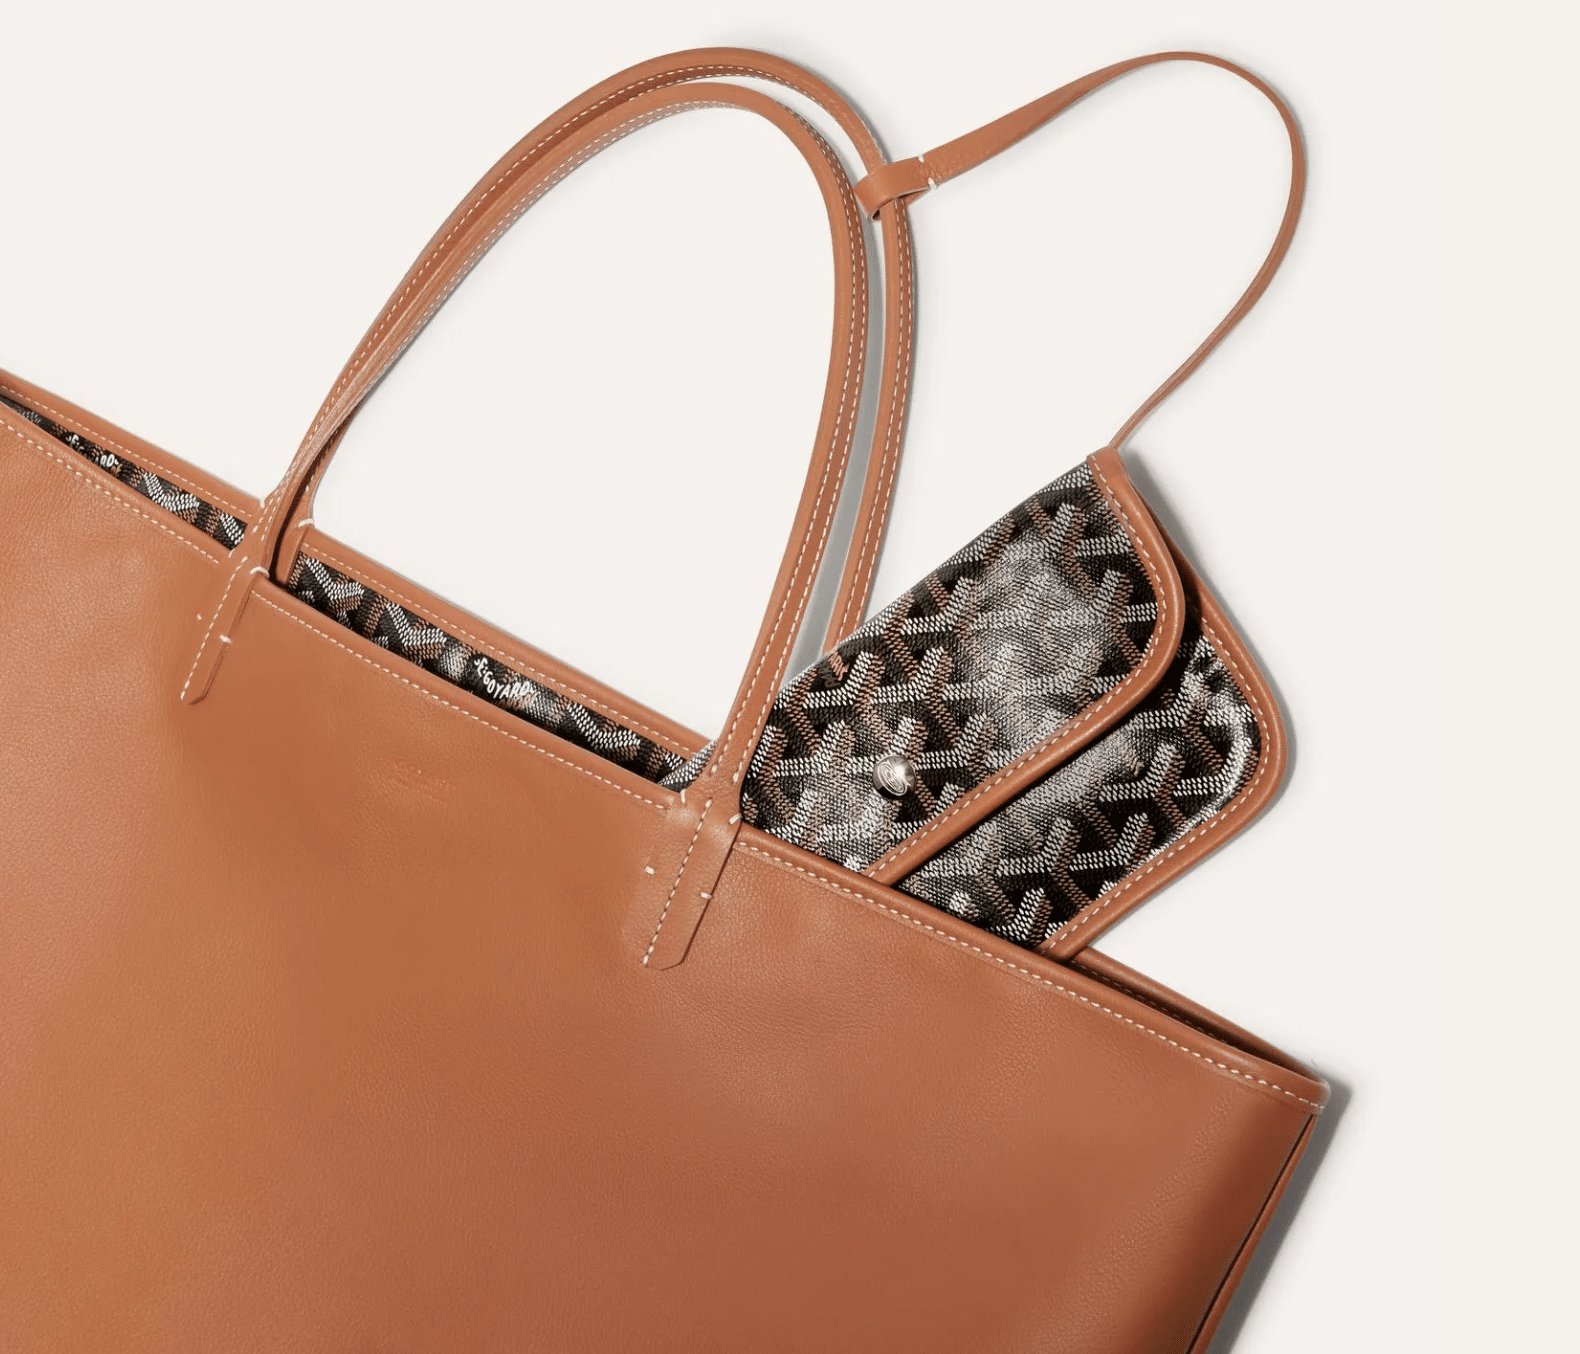 Read more about the article Goyard Tote: The Specific Difference Between All Goyard Totes